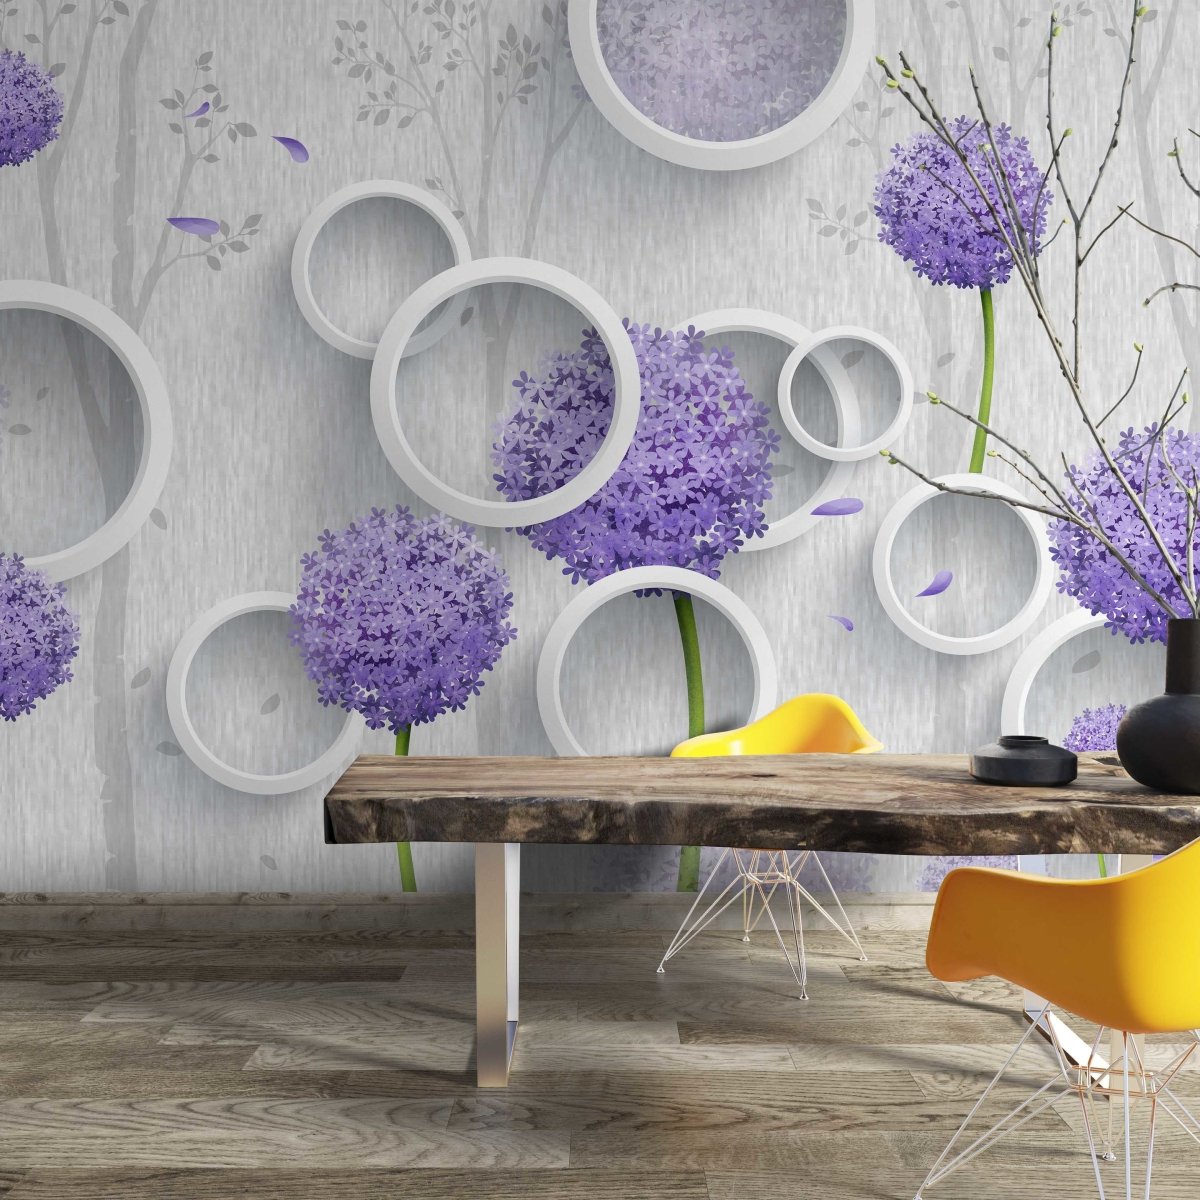 Fototapet Purple Dandelions with Circles - clevny.ro